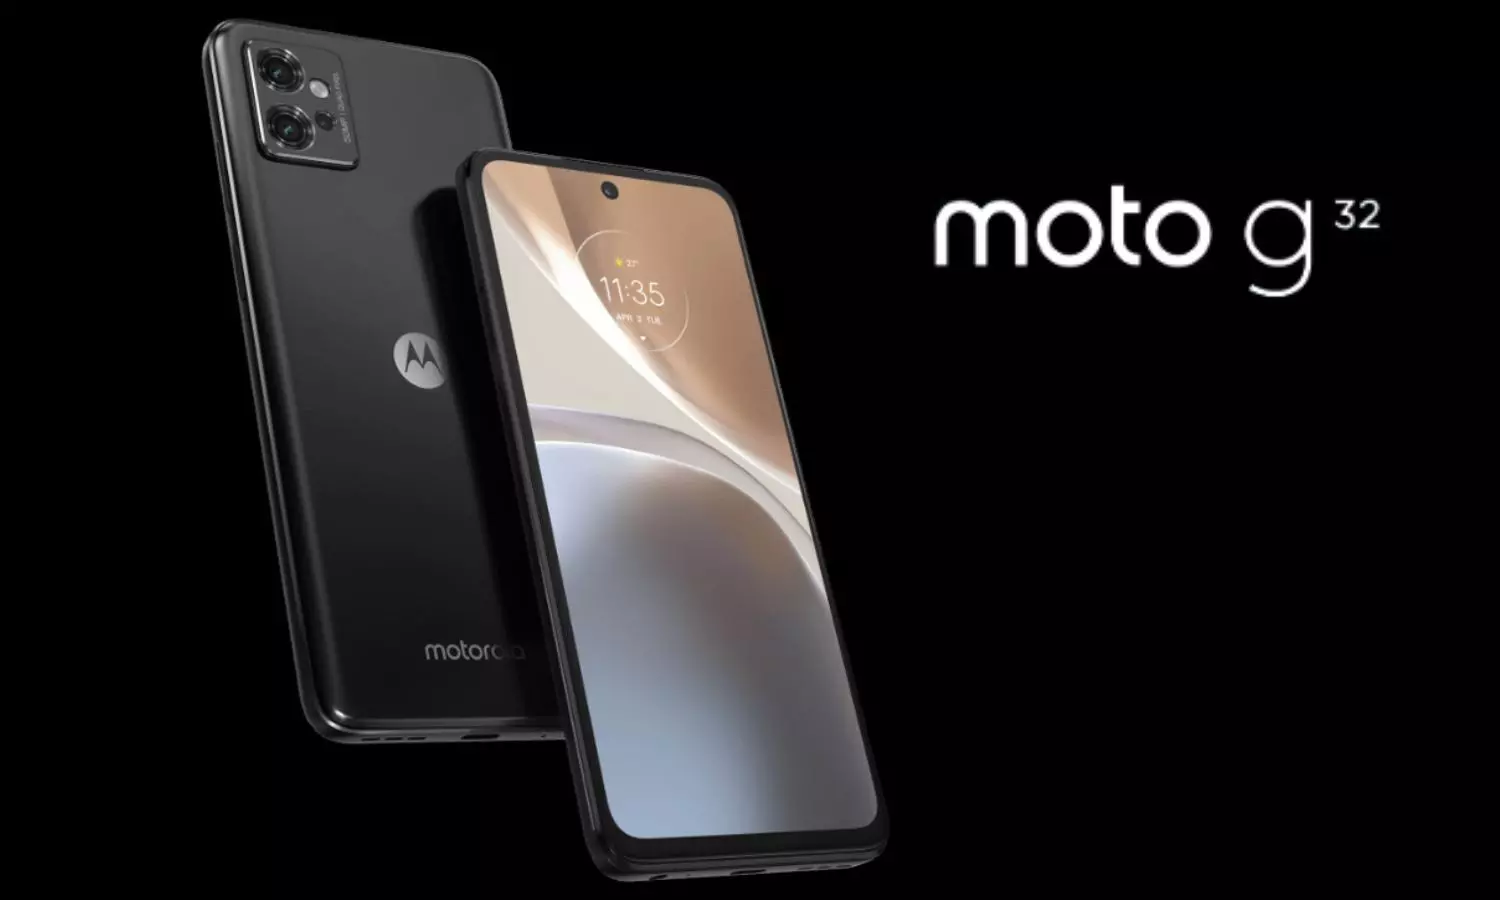 motog32 price and features